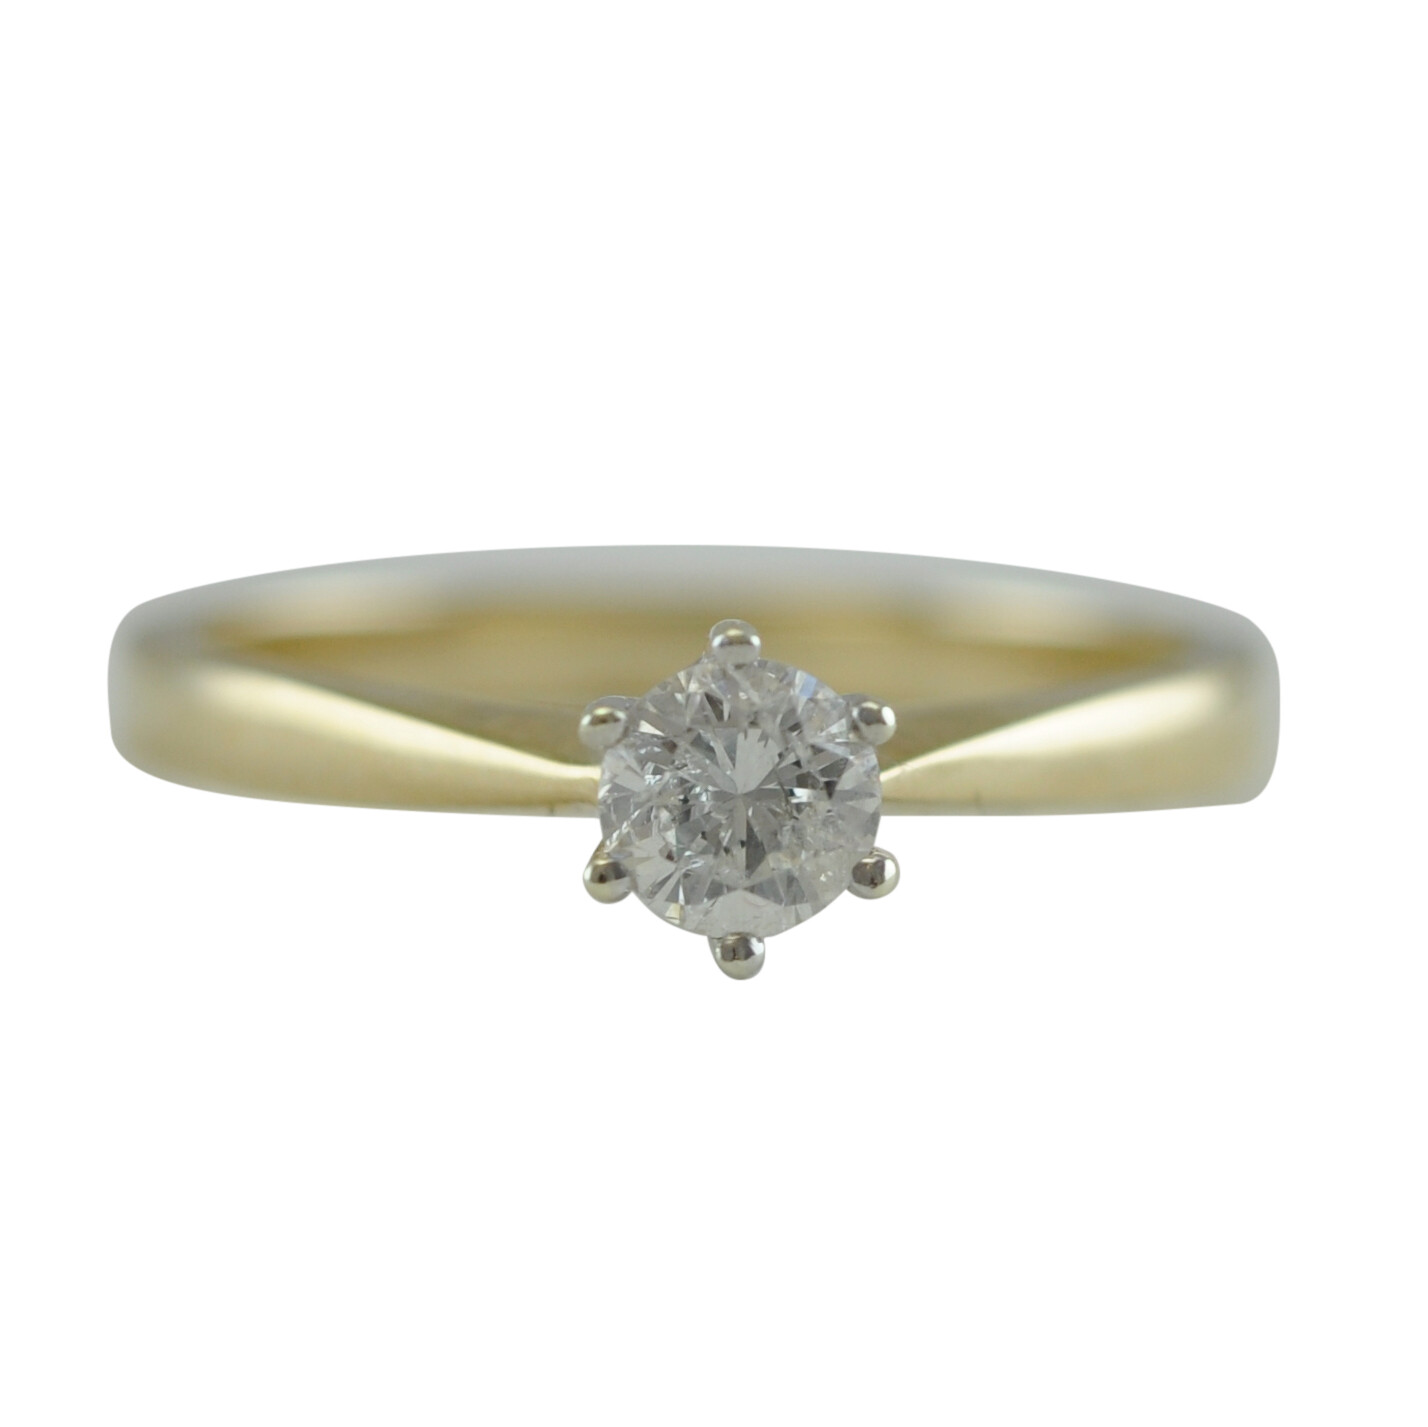 L & T Heirlooms Second Hand 9ct Gold Diamond Engagement Ring at John Lewis  & Partners